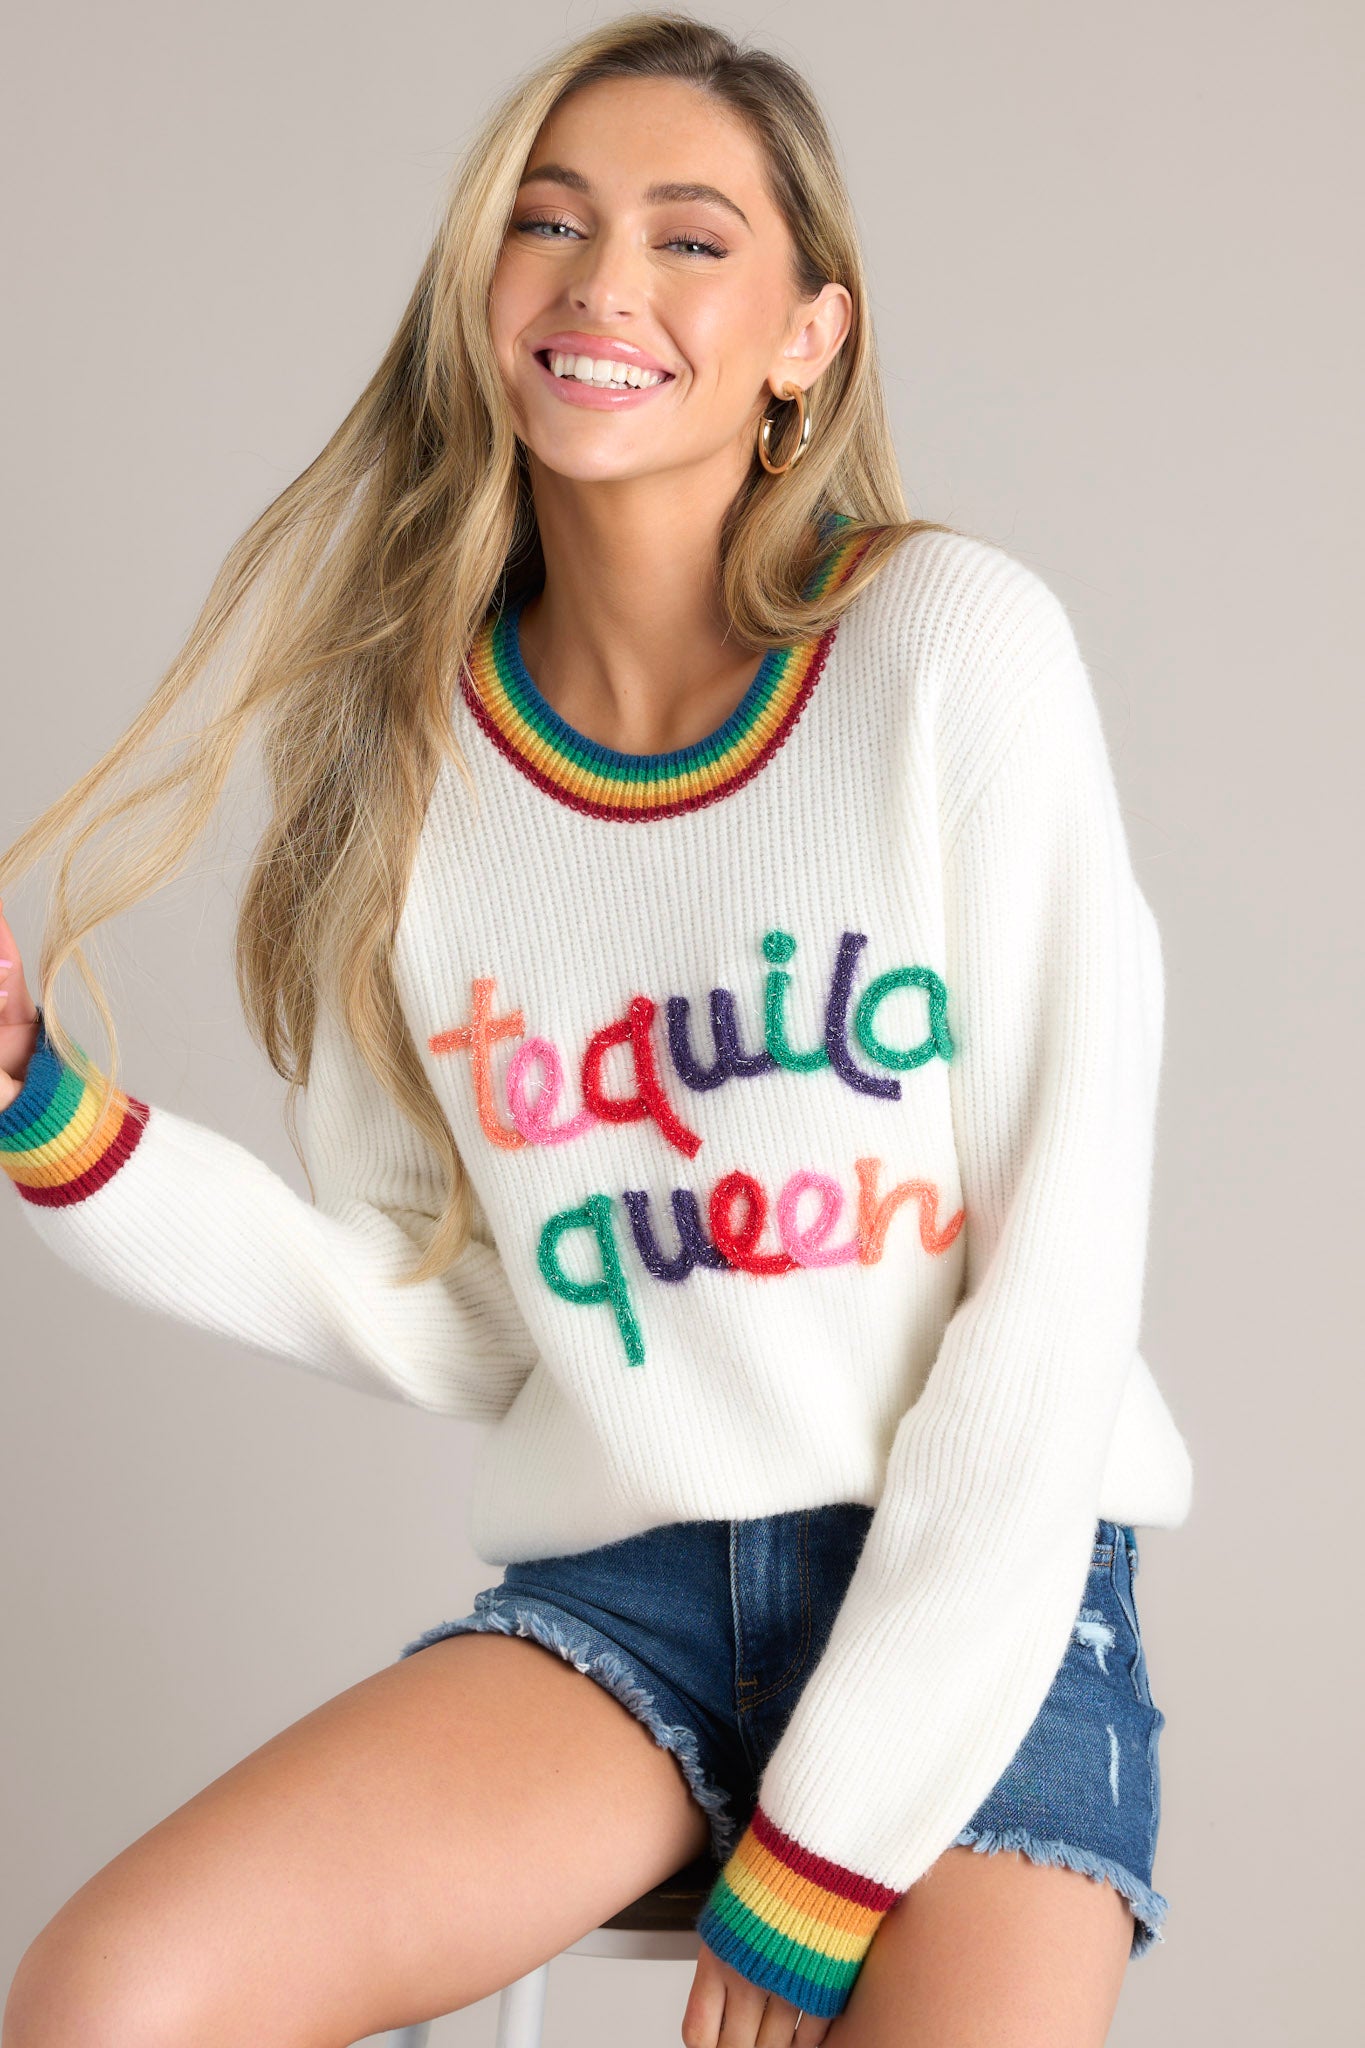 White Tequila Queen Sweater - All Tops | Red Dress